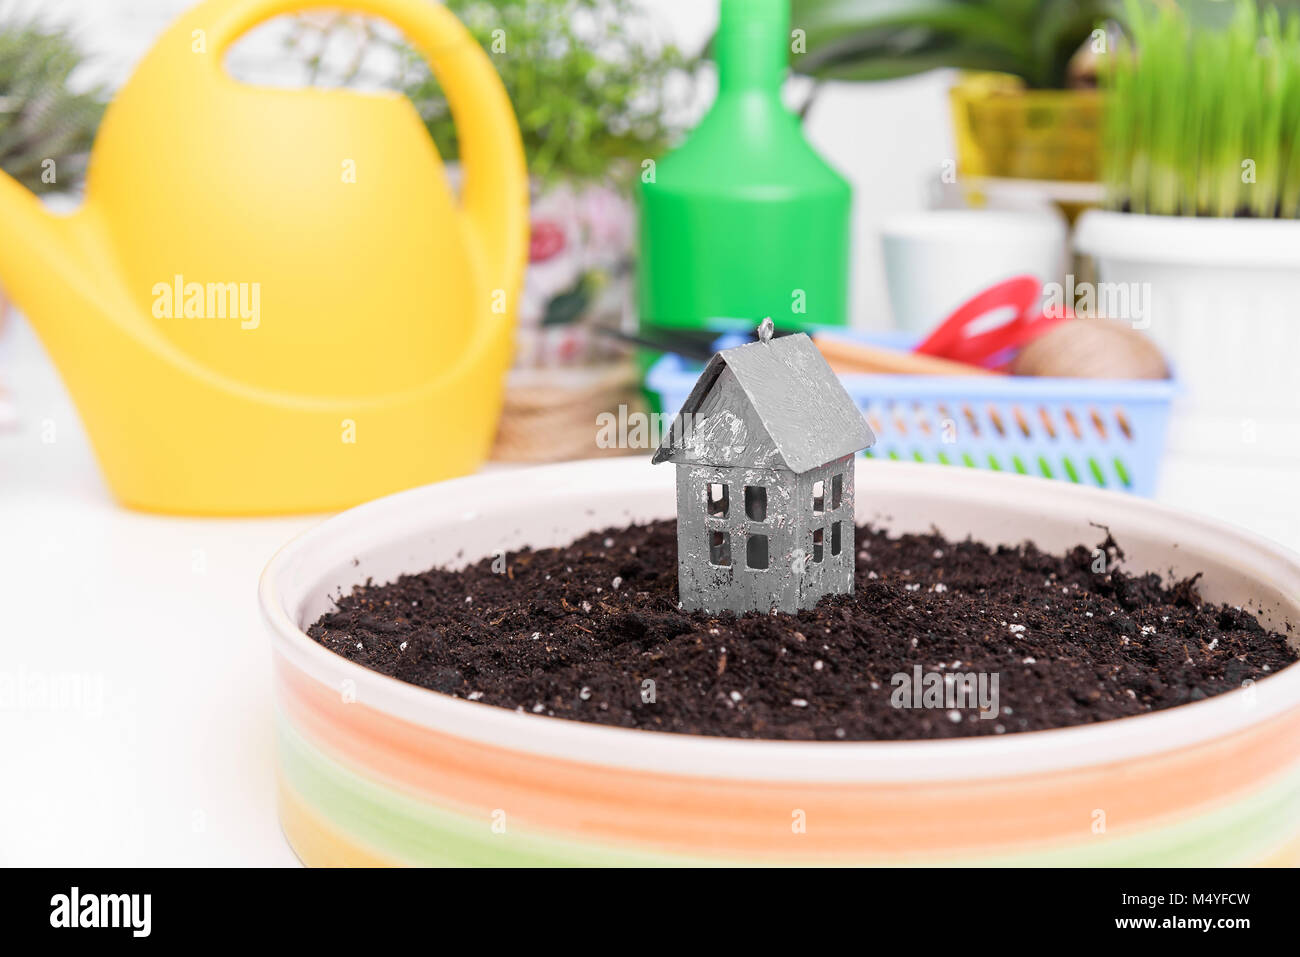 Model of the house on the ground. Stock Photo